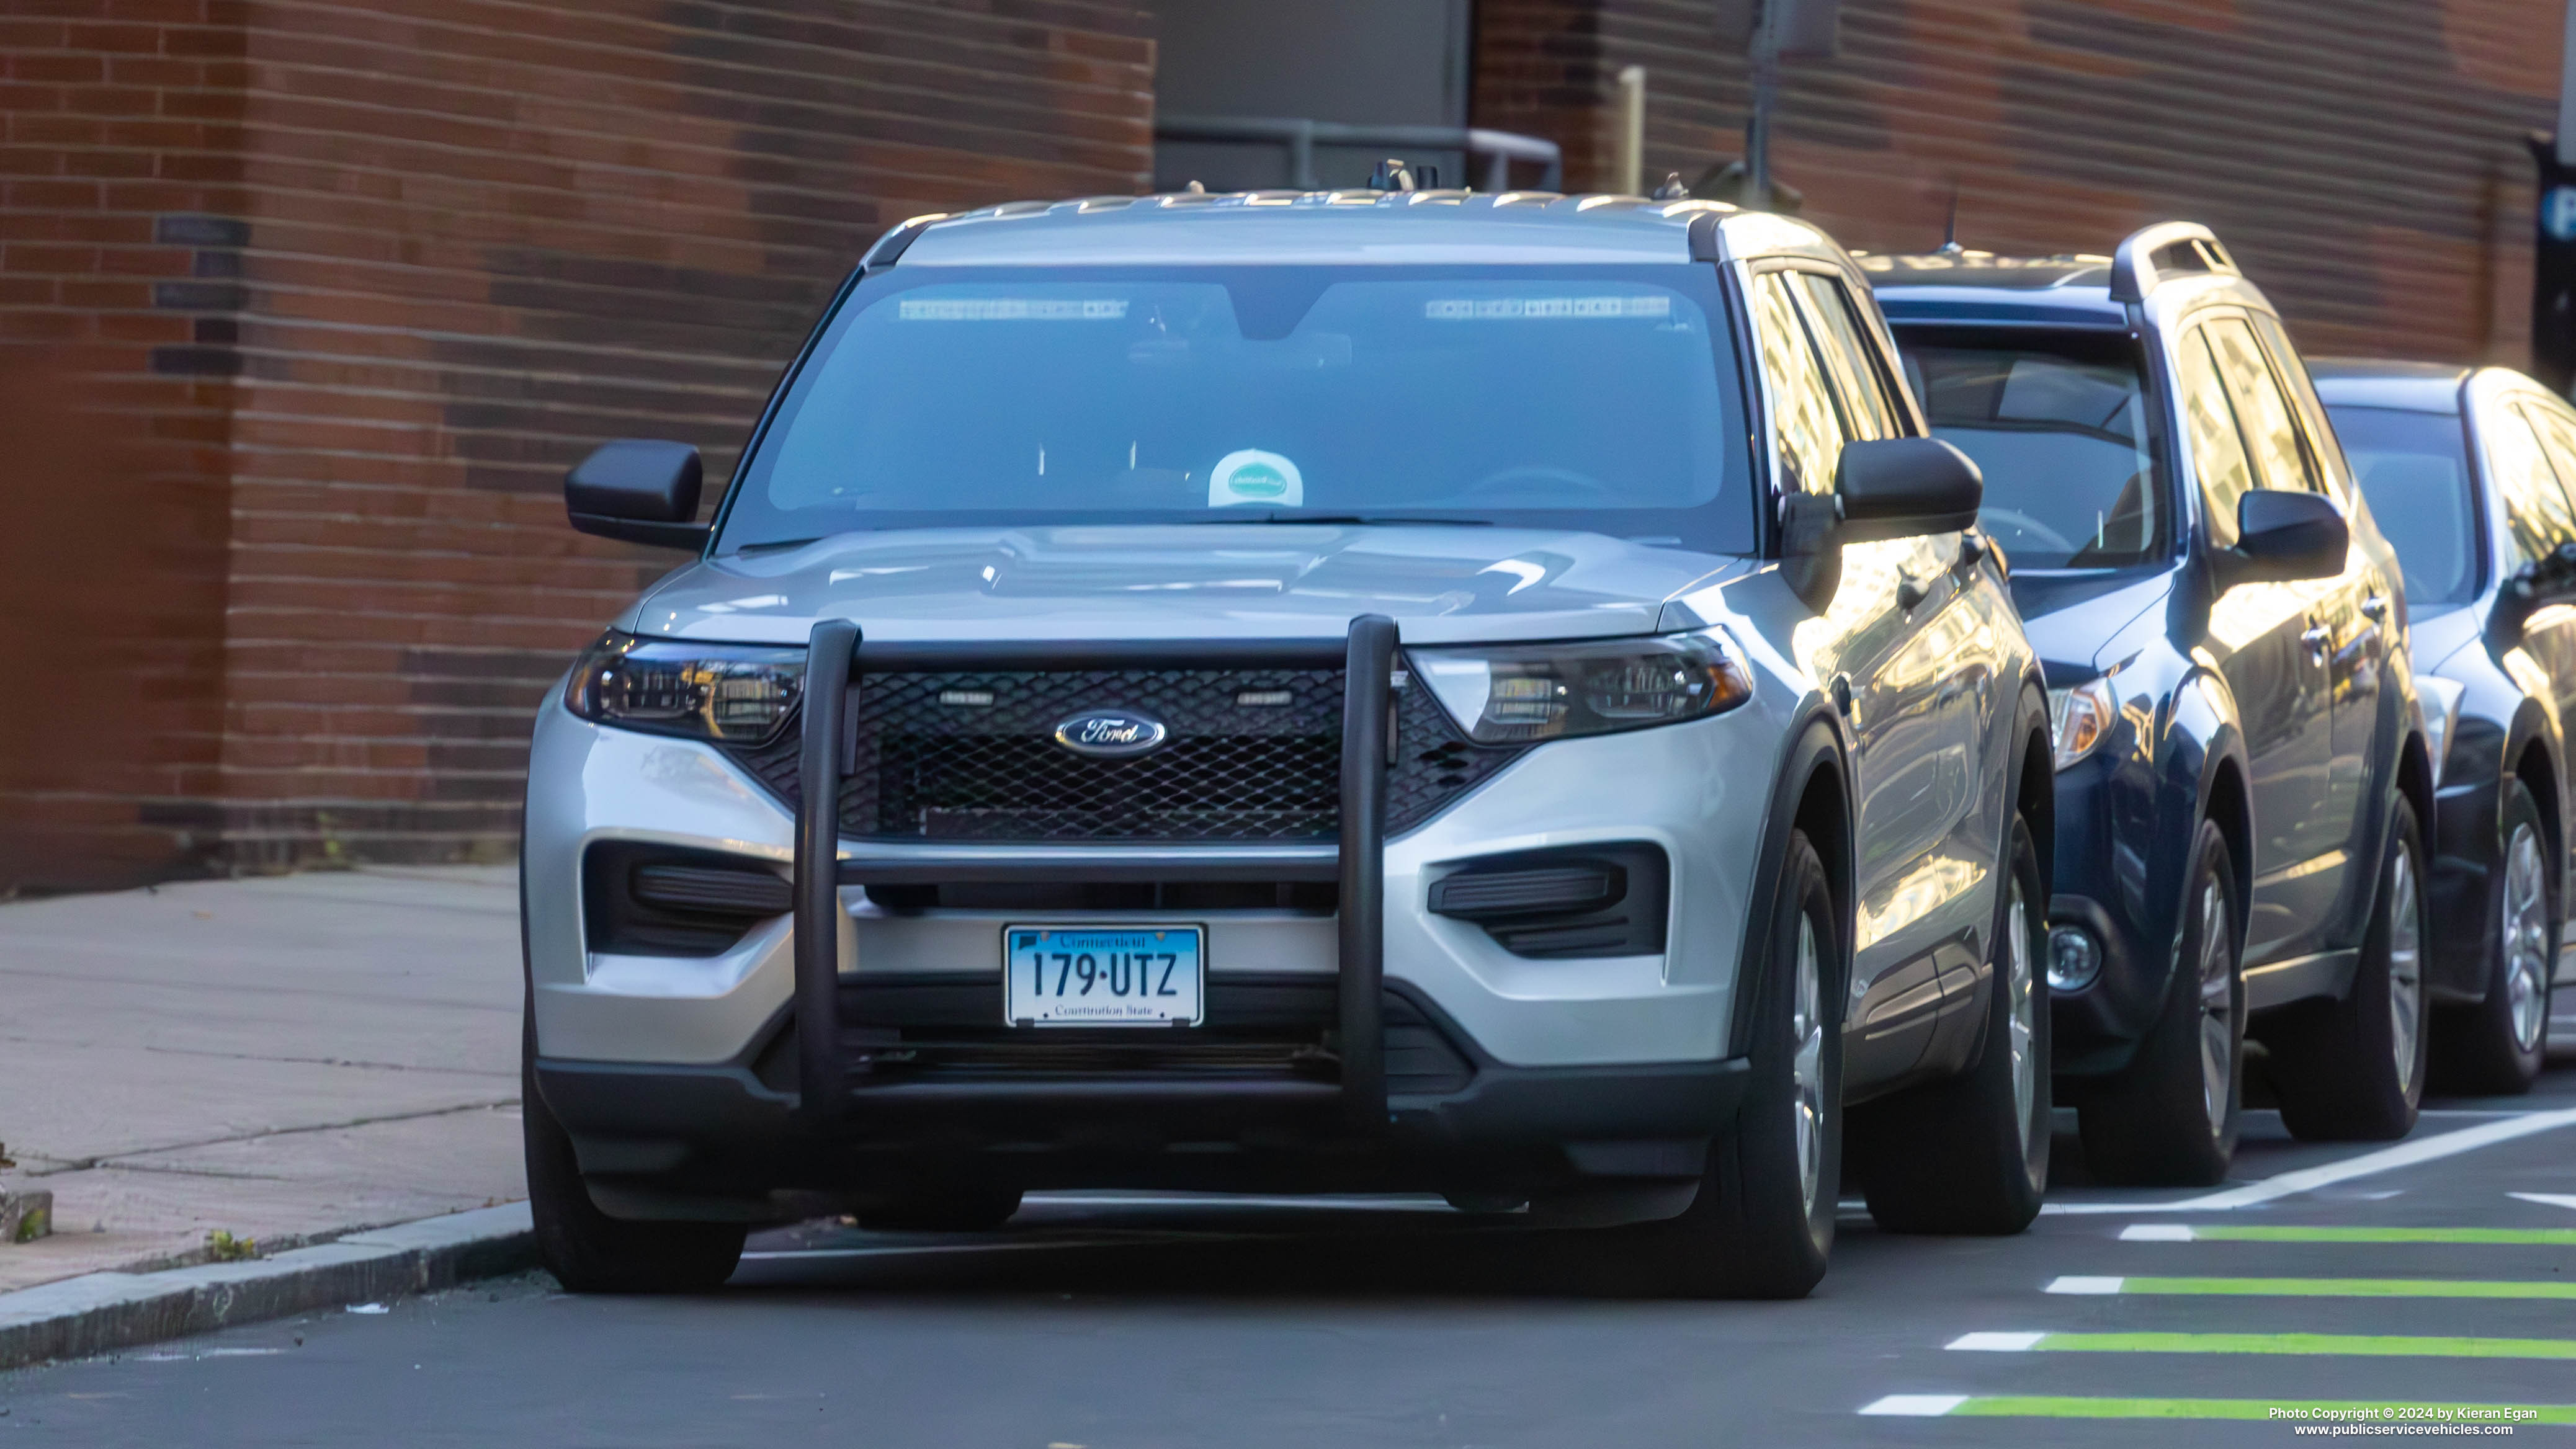 A photo  of Connecticut State Police
            Cruiser 179, a 2021-2022 Ford Police Interceptor Utility             taken by Kieran Egan